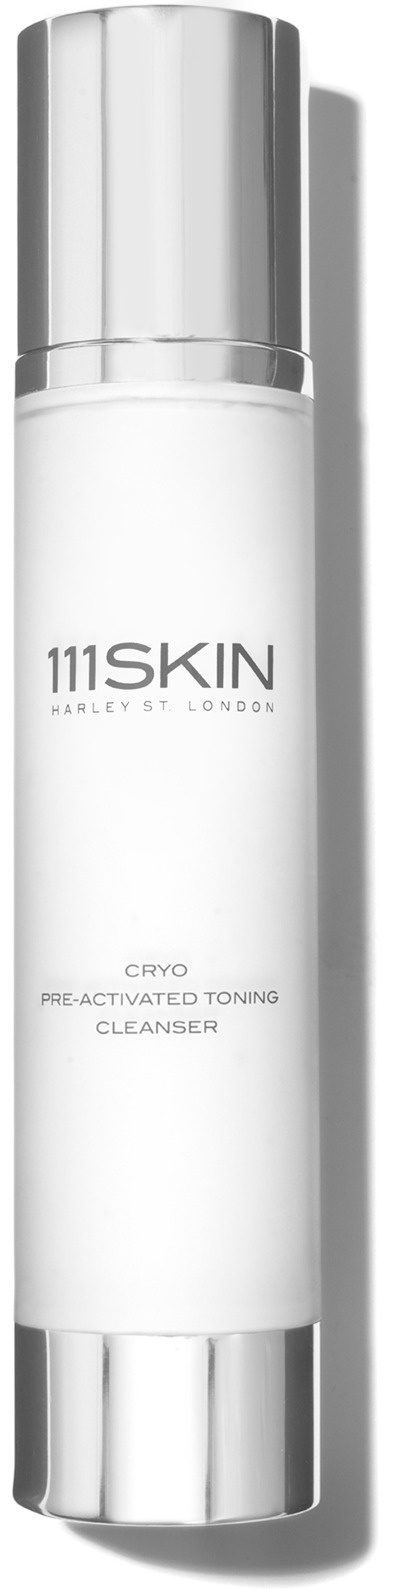 111SKIN Cryo Pre-activated Toning Cleanser